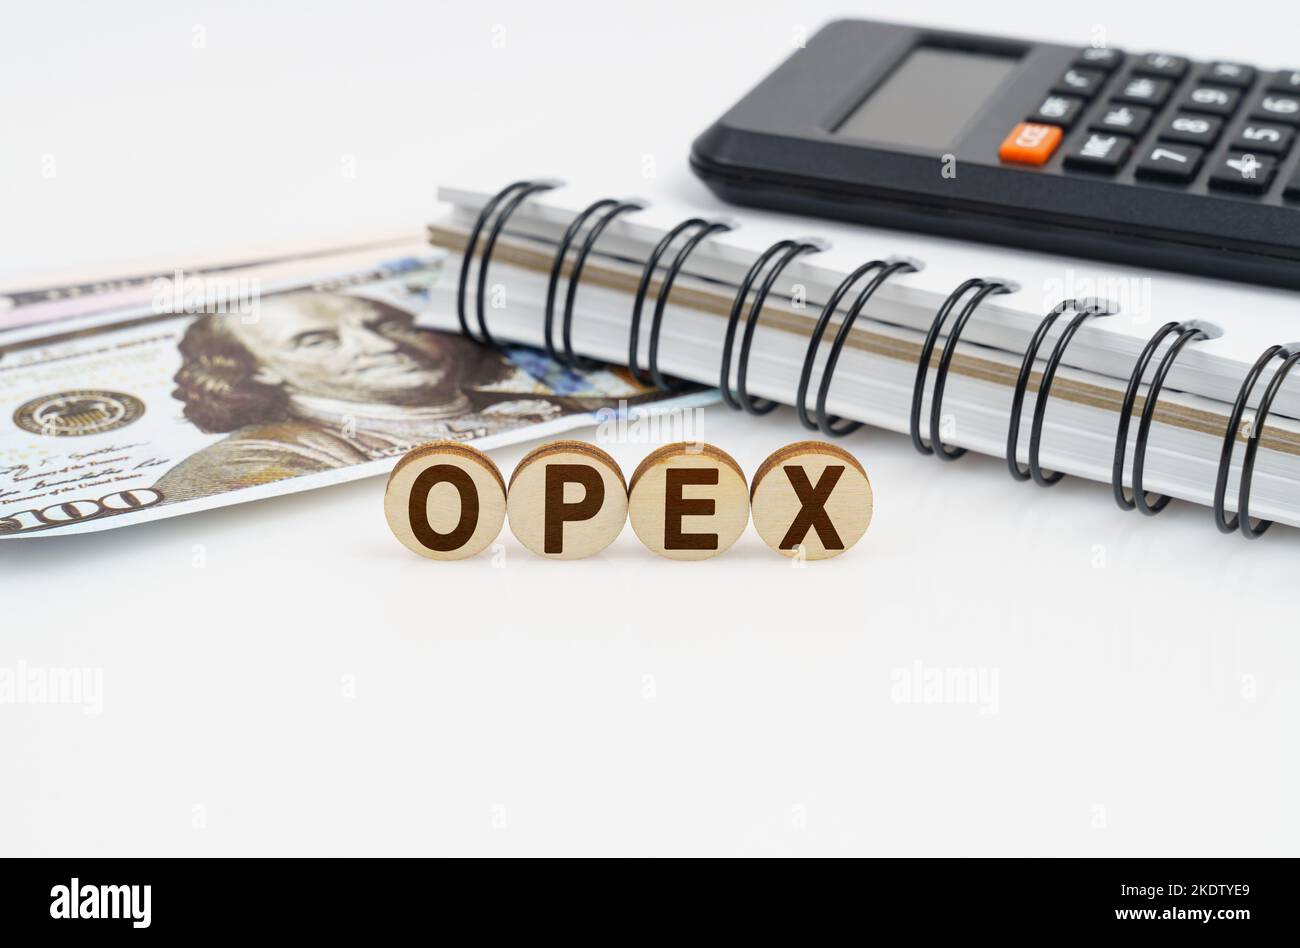 Business concept. On a white surface are dollars, a notebook, a calculator and wooden circles with the inscription - OPEX Stock Photo